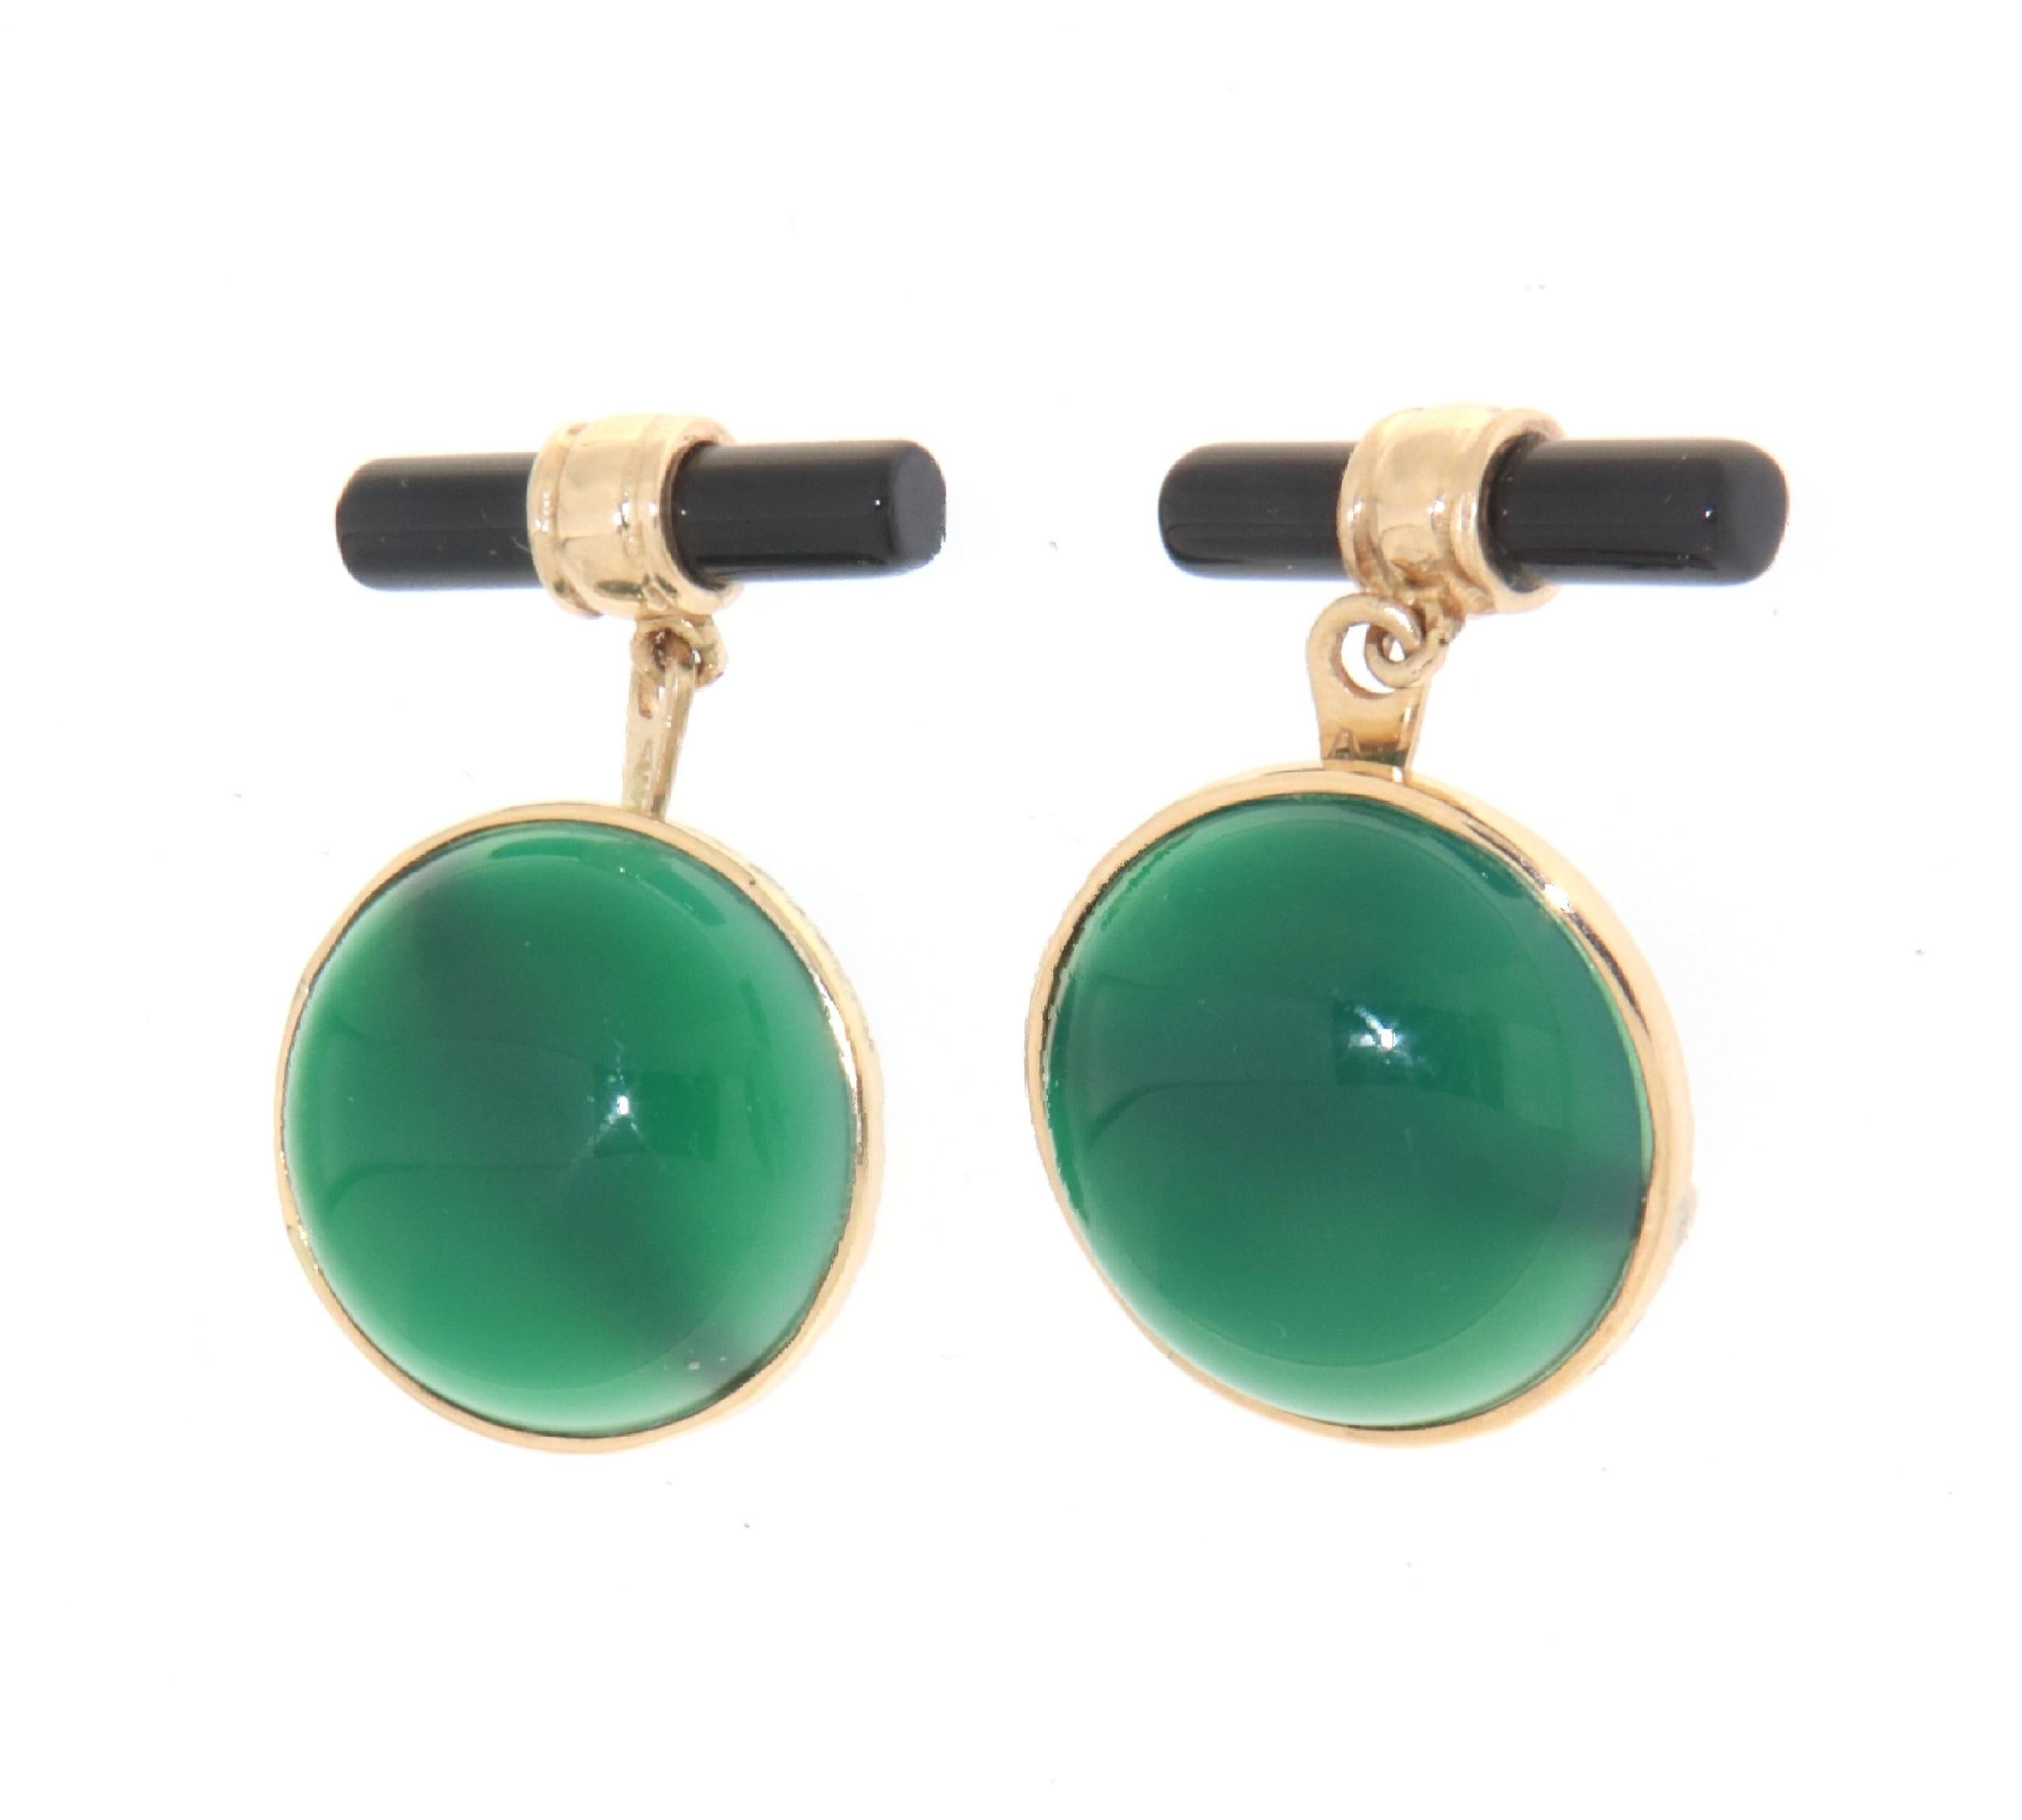 Beautiful cuffs handmade by expert craftsmen, in 14K yellow gold and green agate.

The barrels are made of green agate

The total weight of the cuffs corresponds to 11.90 grams